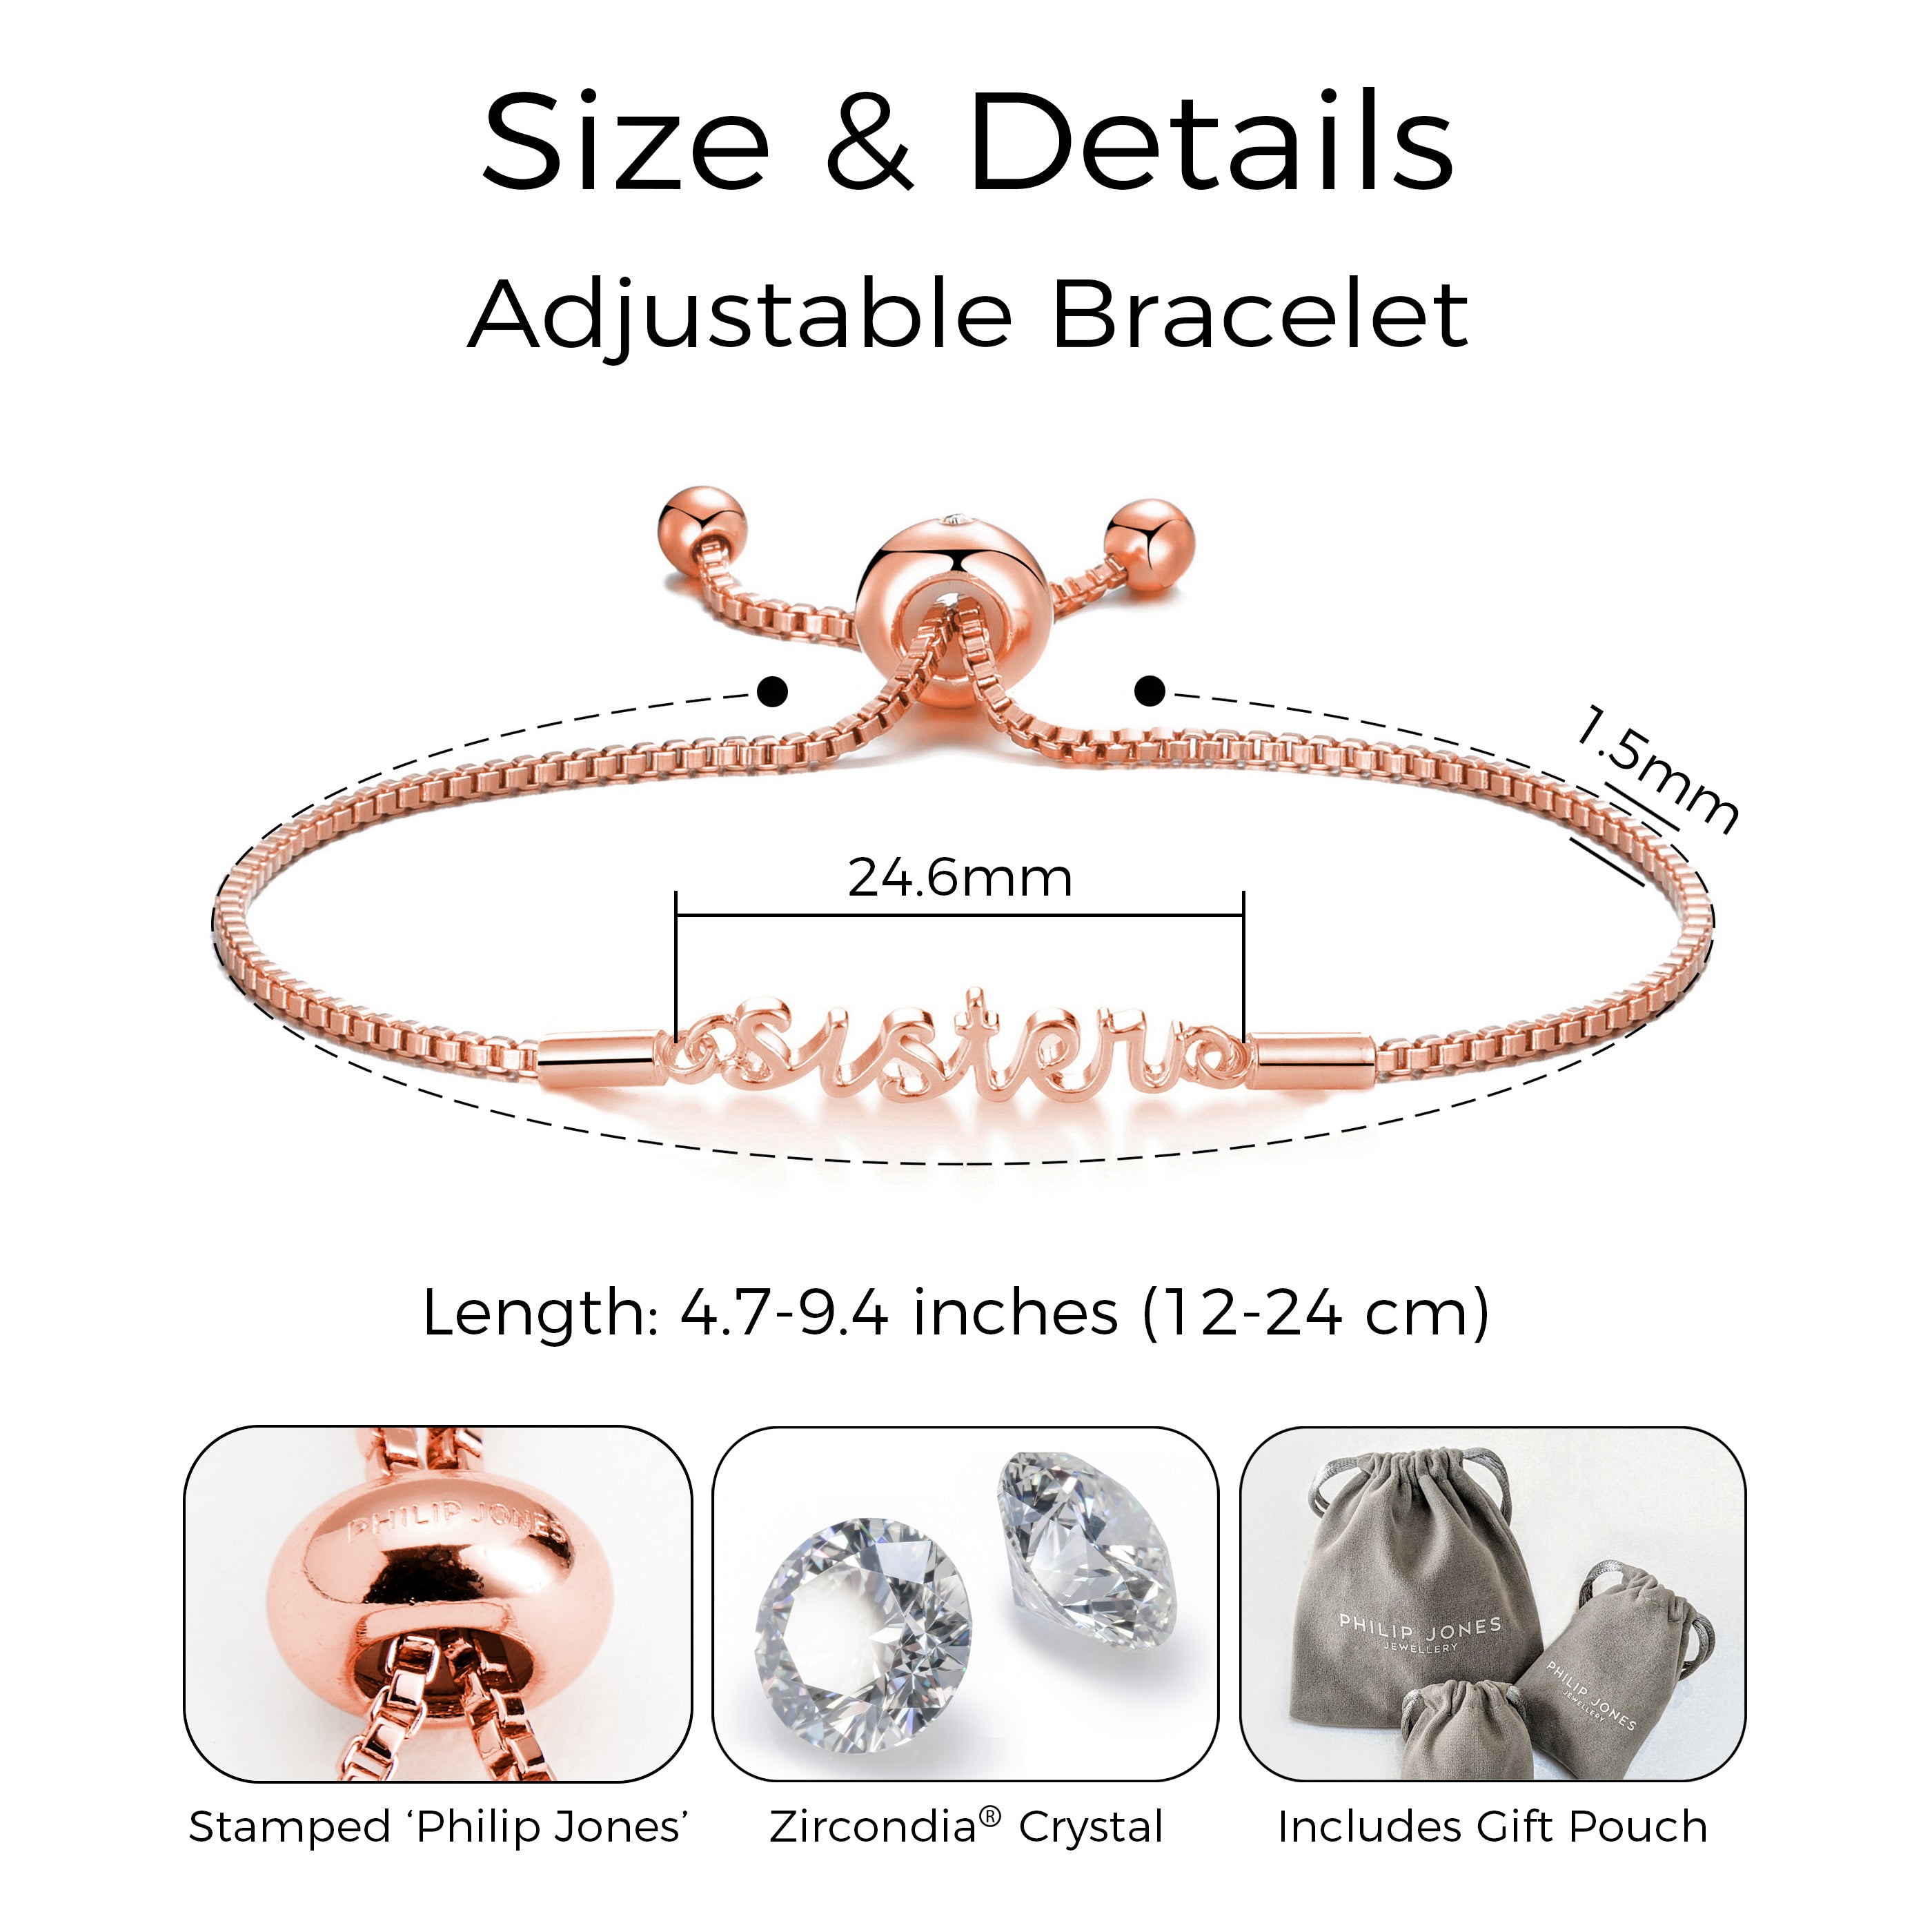 Rose Gold Plated Sister Bracelet with Quote Card Created with Zircondia® Crystals